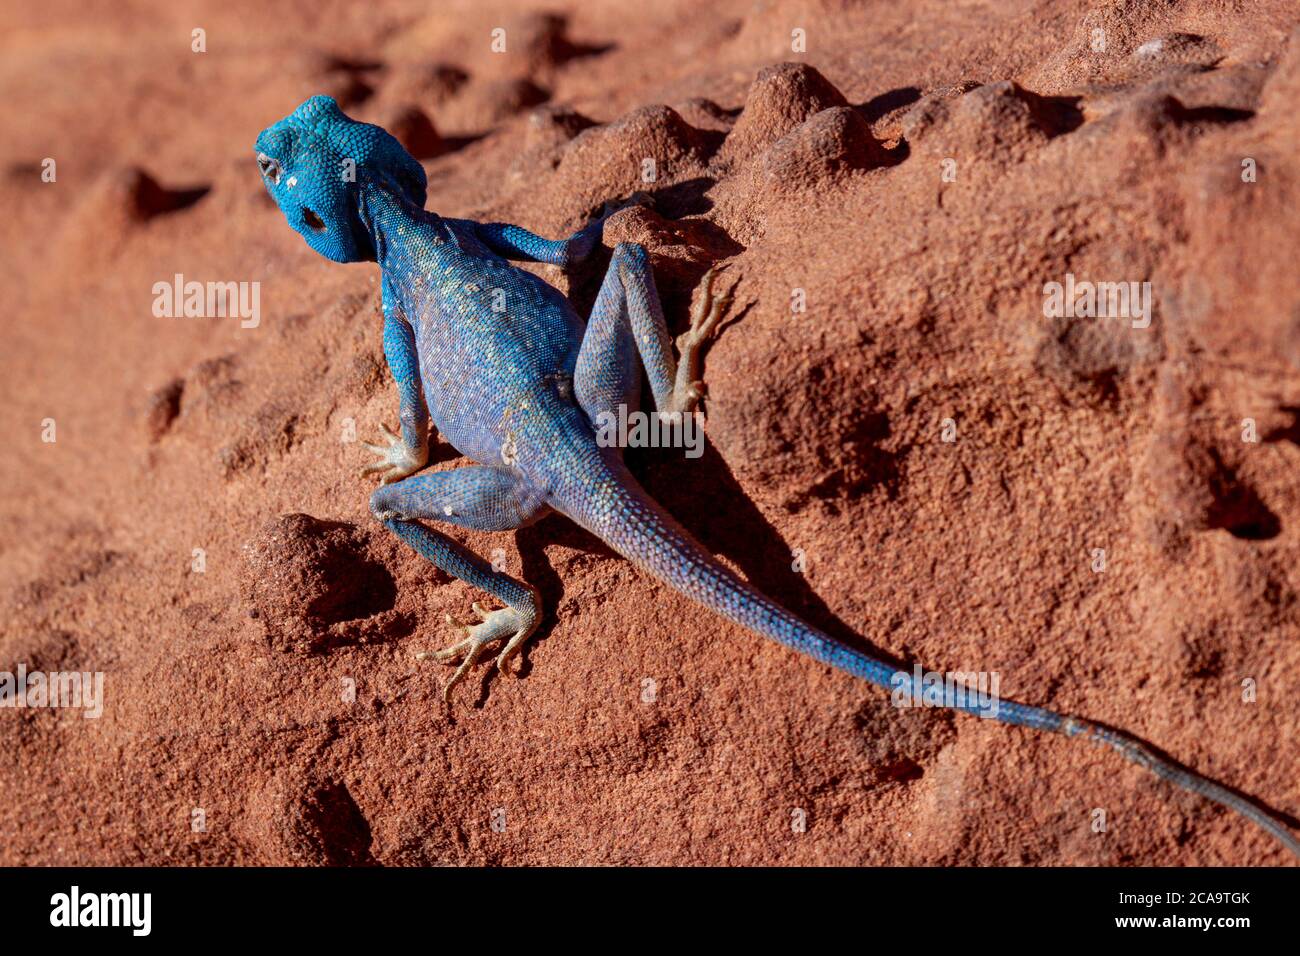 An isolated close up a Blue Agama (Sinai Agama) lizard the red